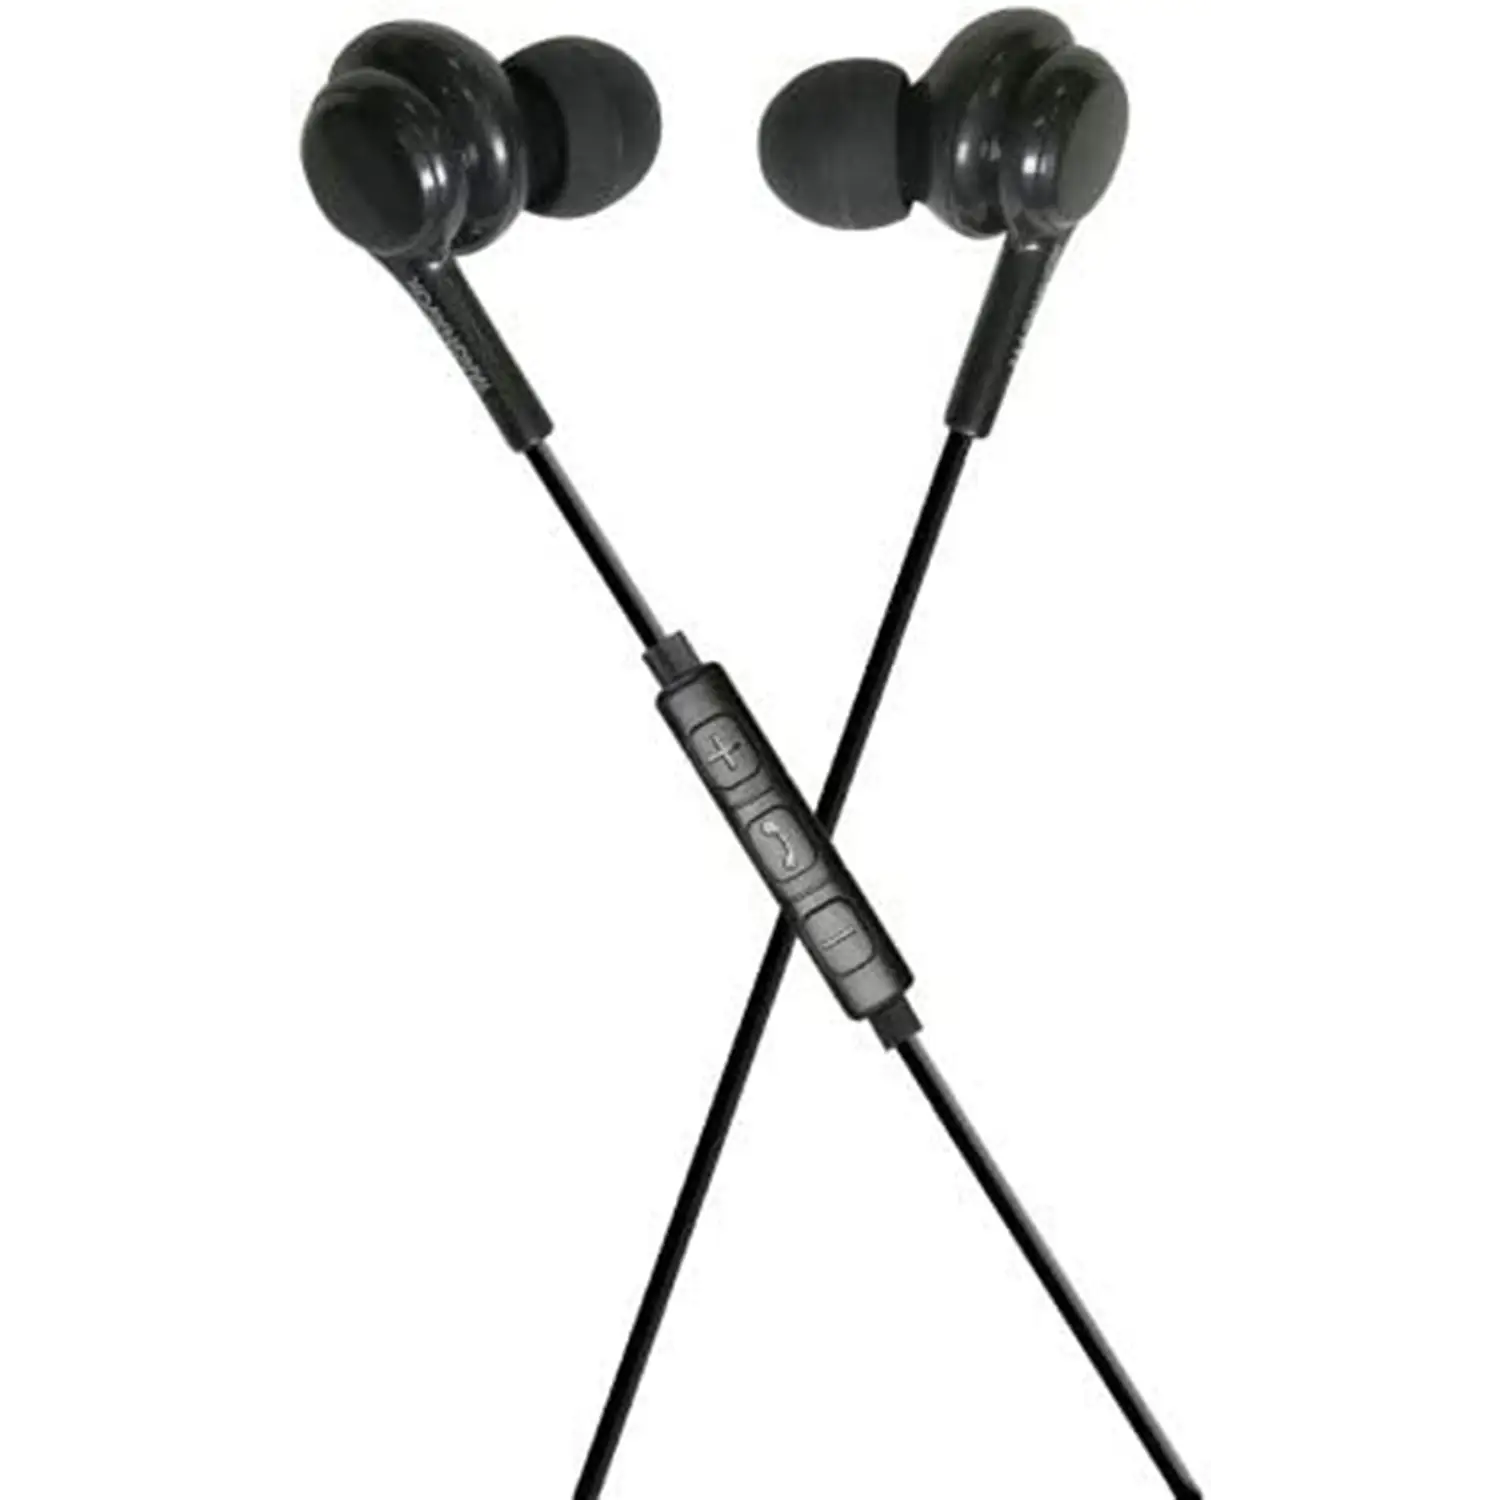 Magnavox Extreme Base Earbuds w/ Microphone (Black)